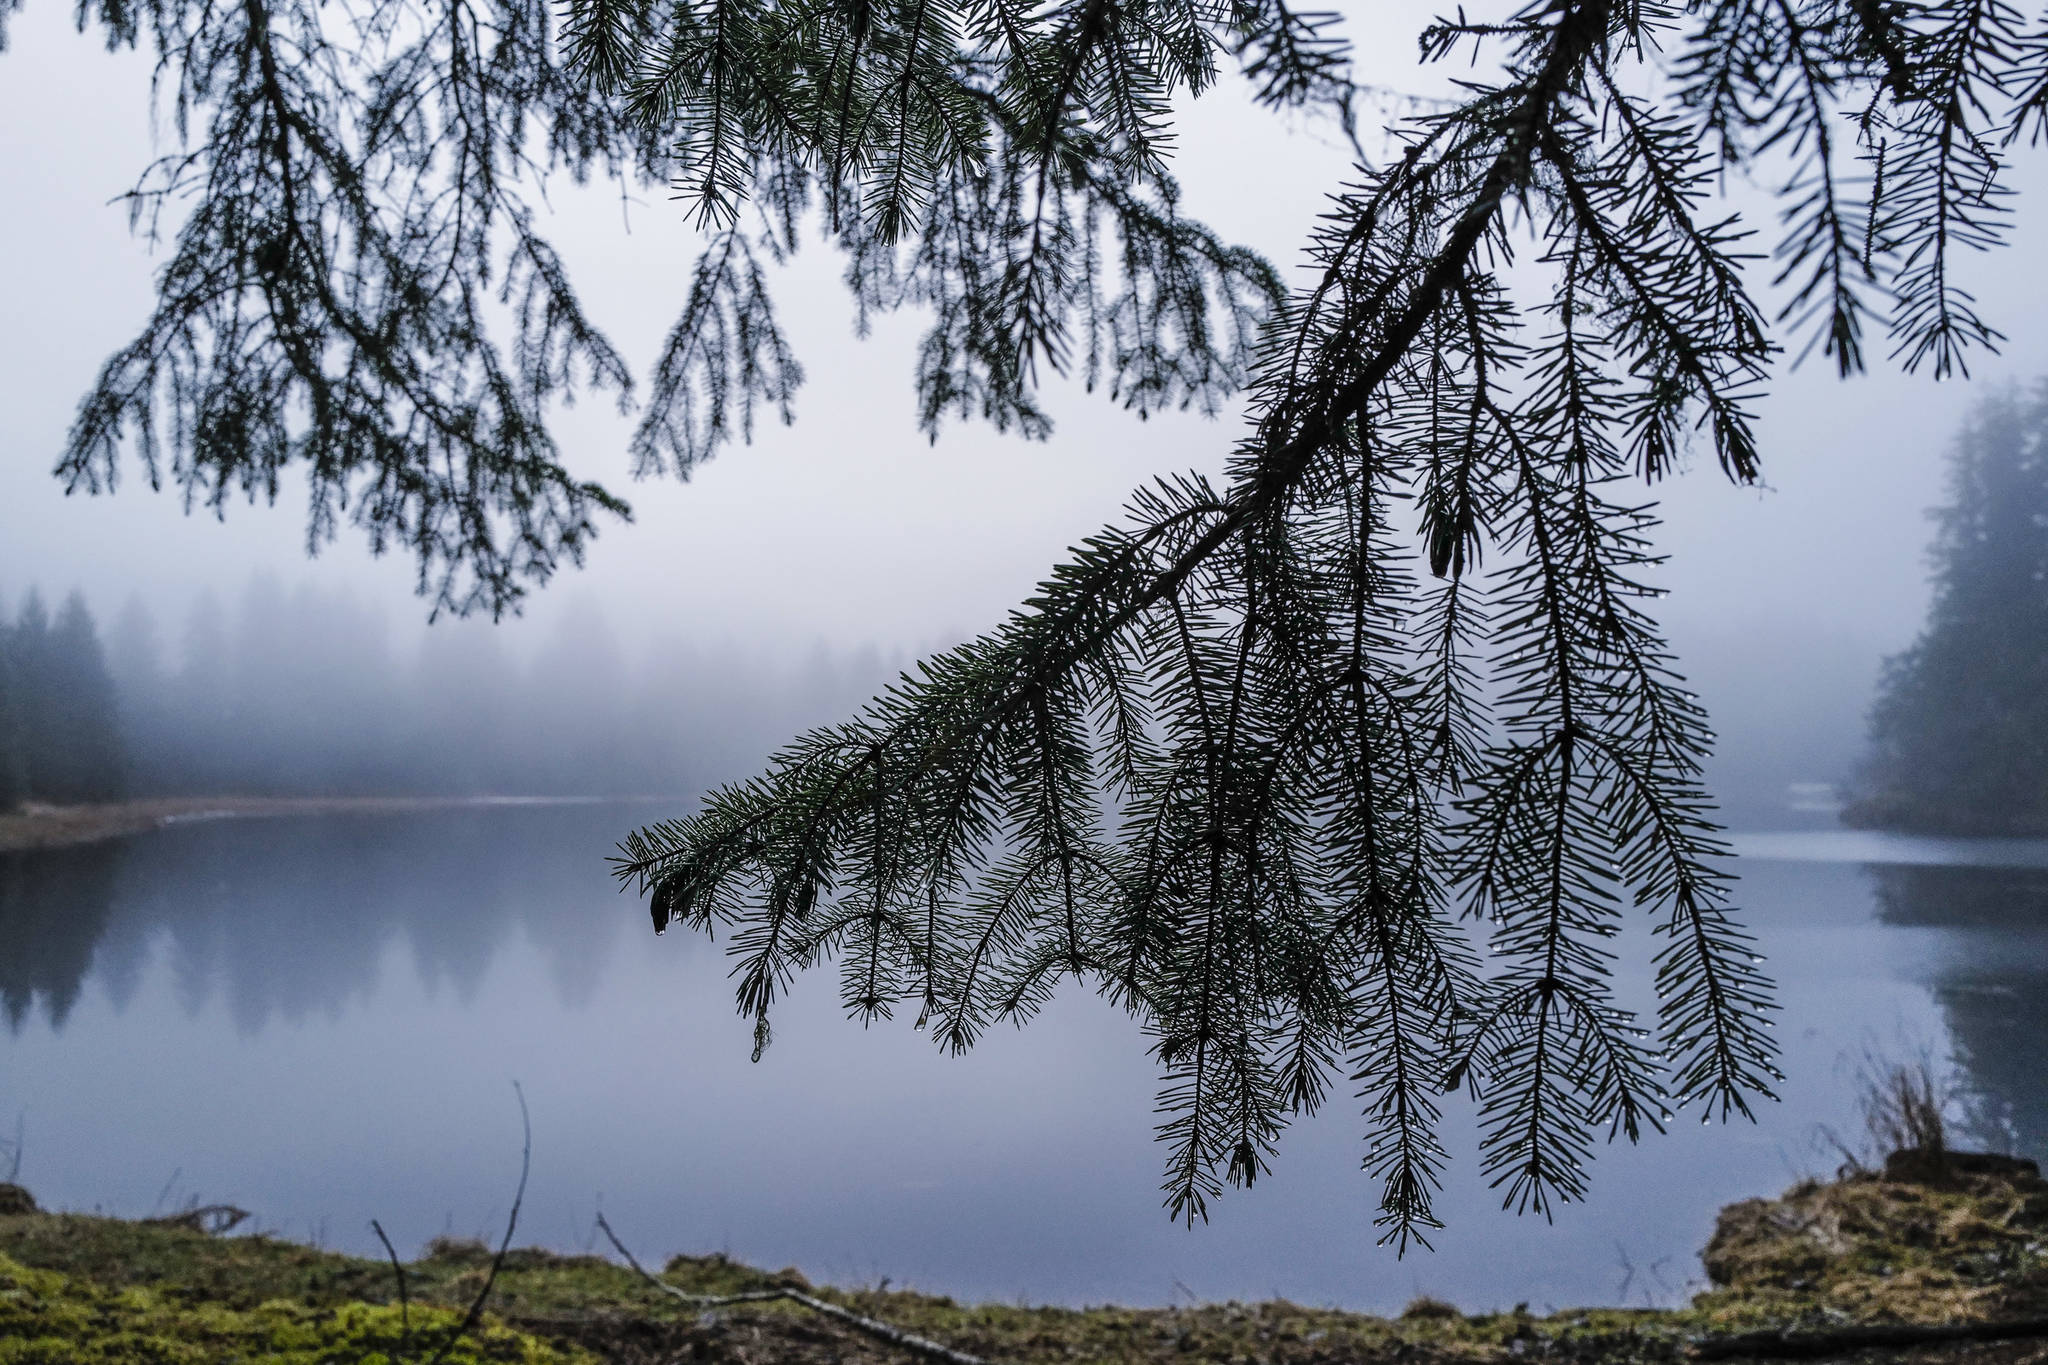 Spruce boughs hang near a pond in the Tongass National Forest on Monday, Dec. 9, 2019. (Michael Penn | Juneau Empire)